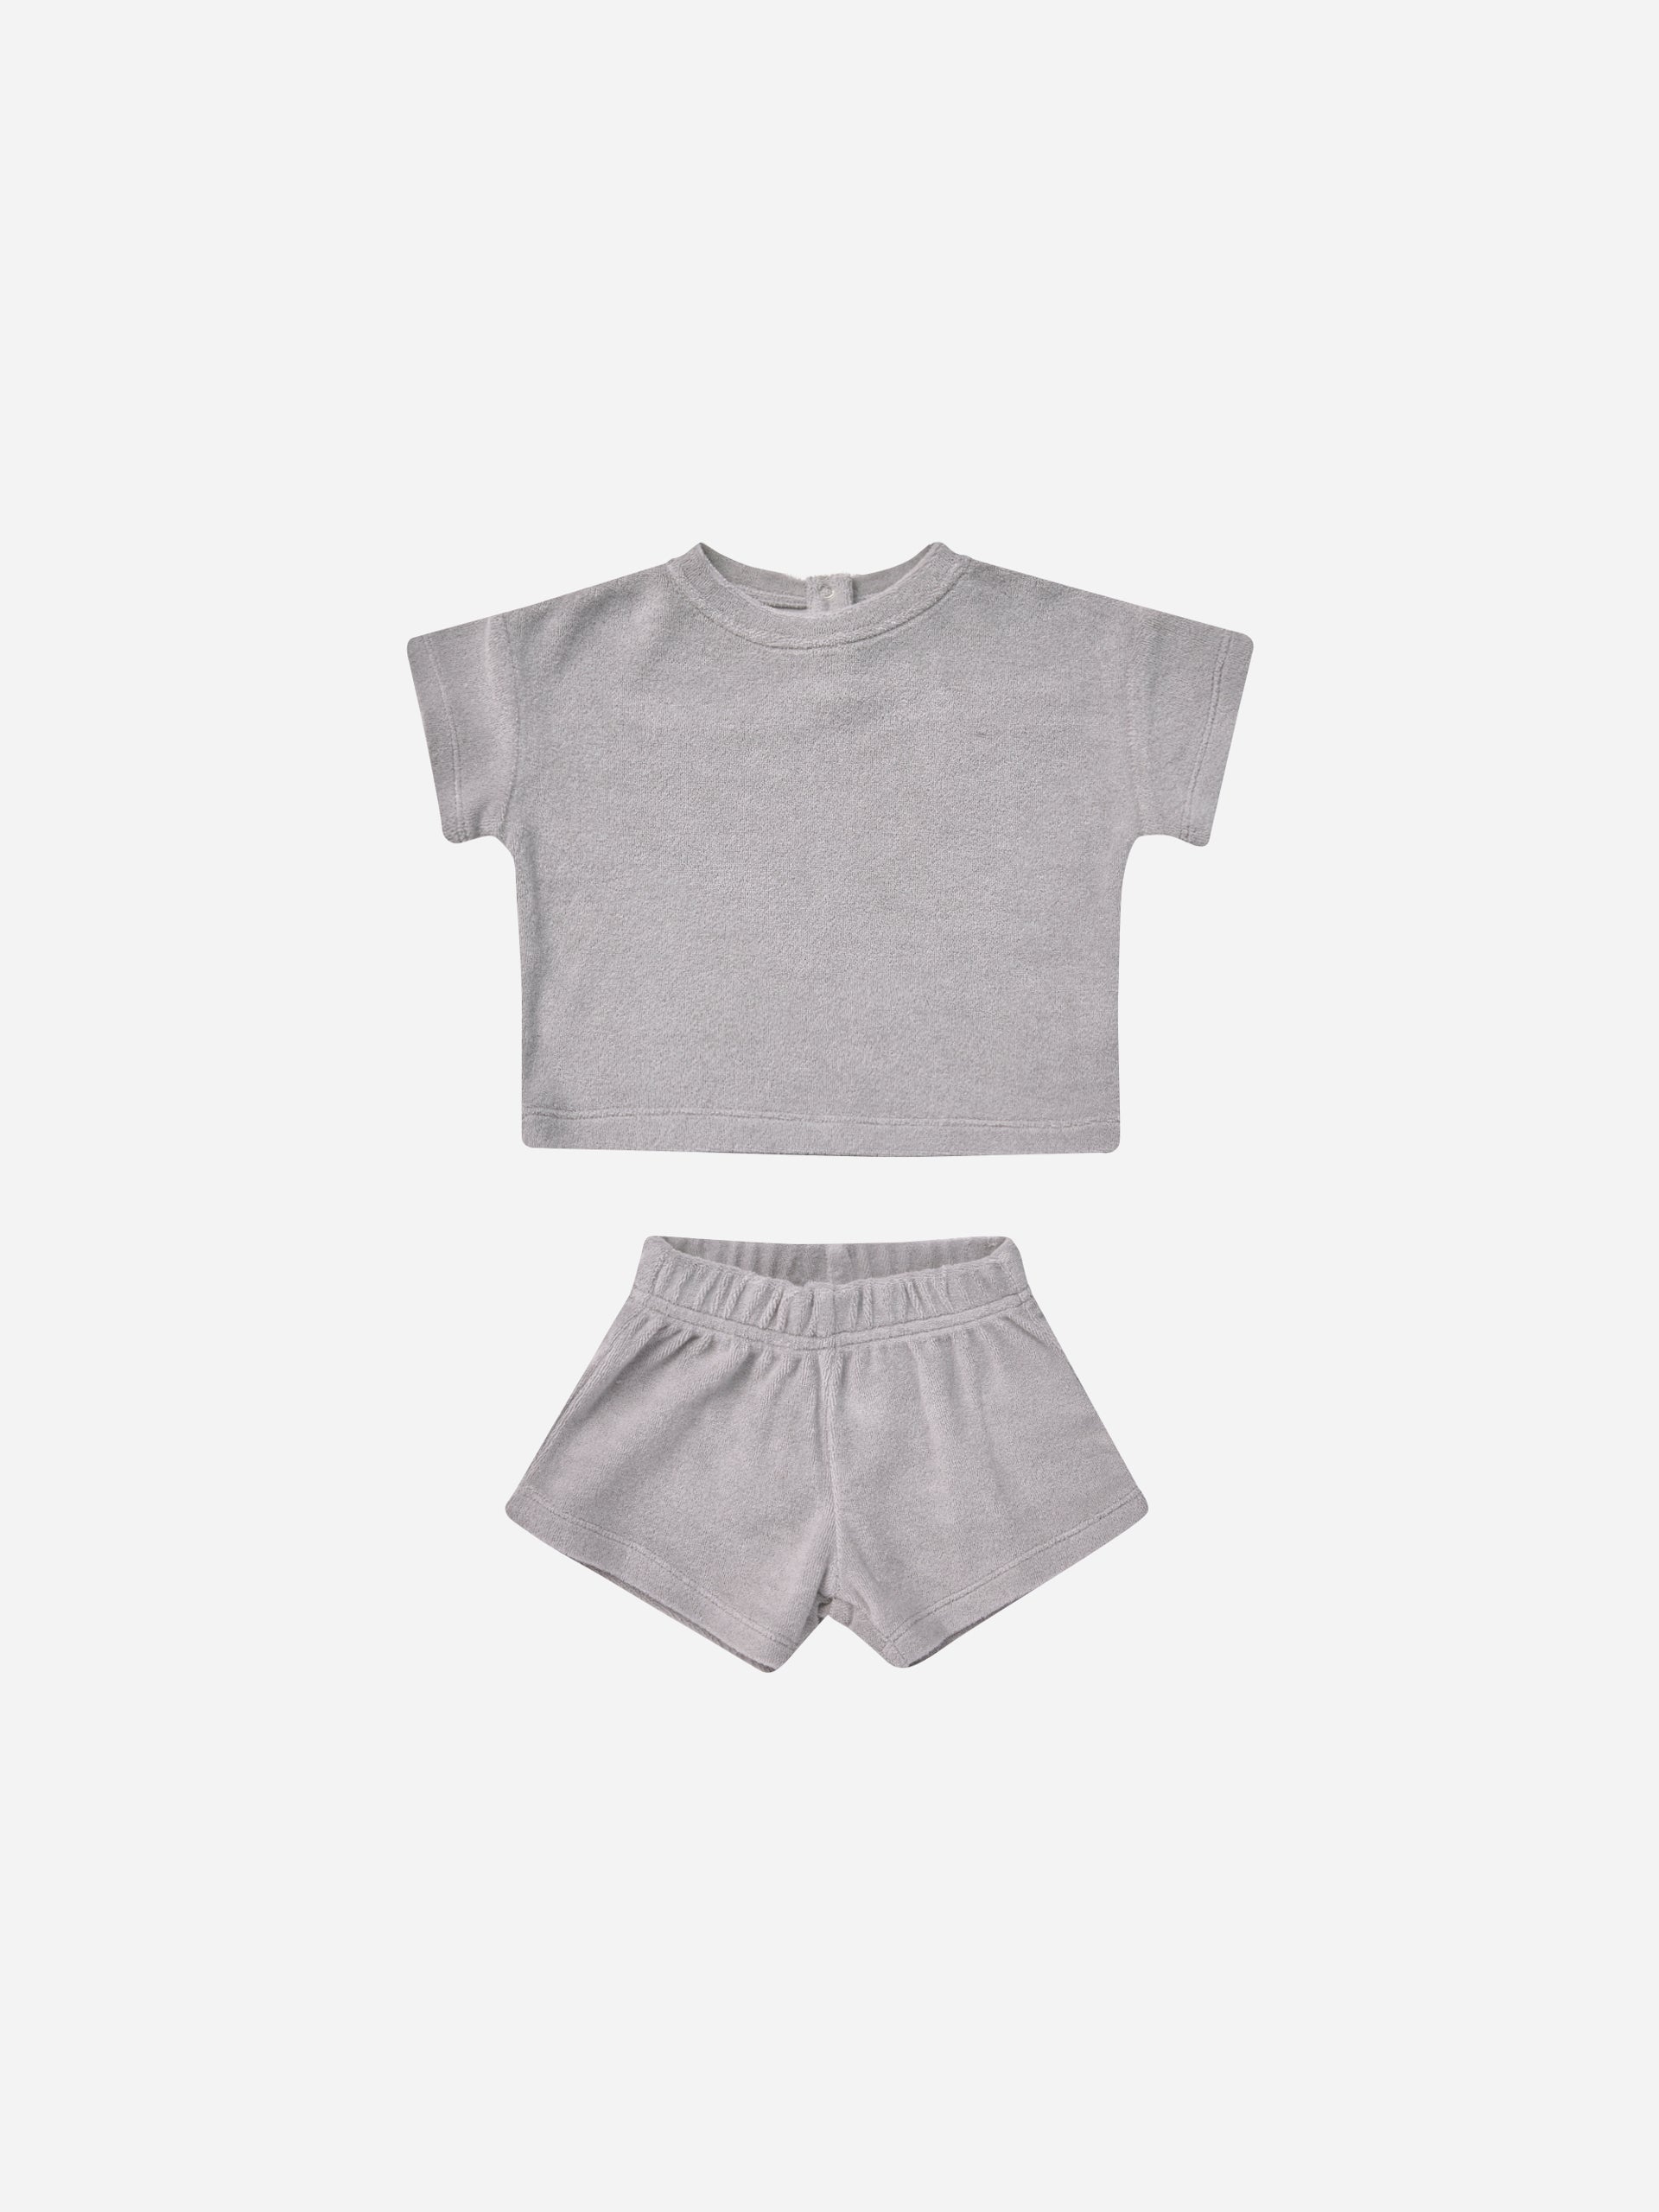 Terry Tee + Shorts Set || Periwinkle - Rylee + Cru | Kids Clothes | Trendy Baby Clothes | Modern Infant Outfits |